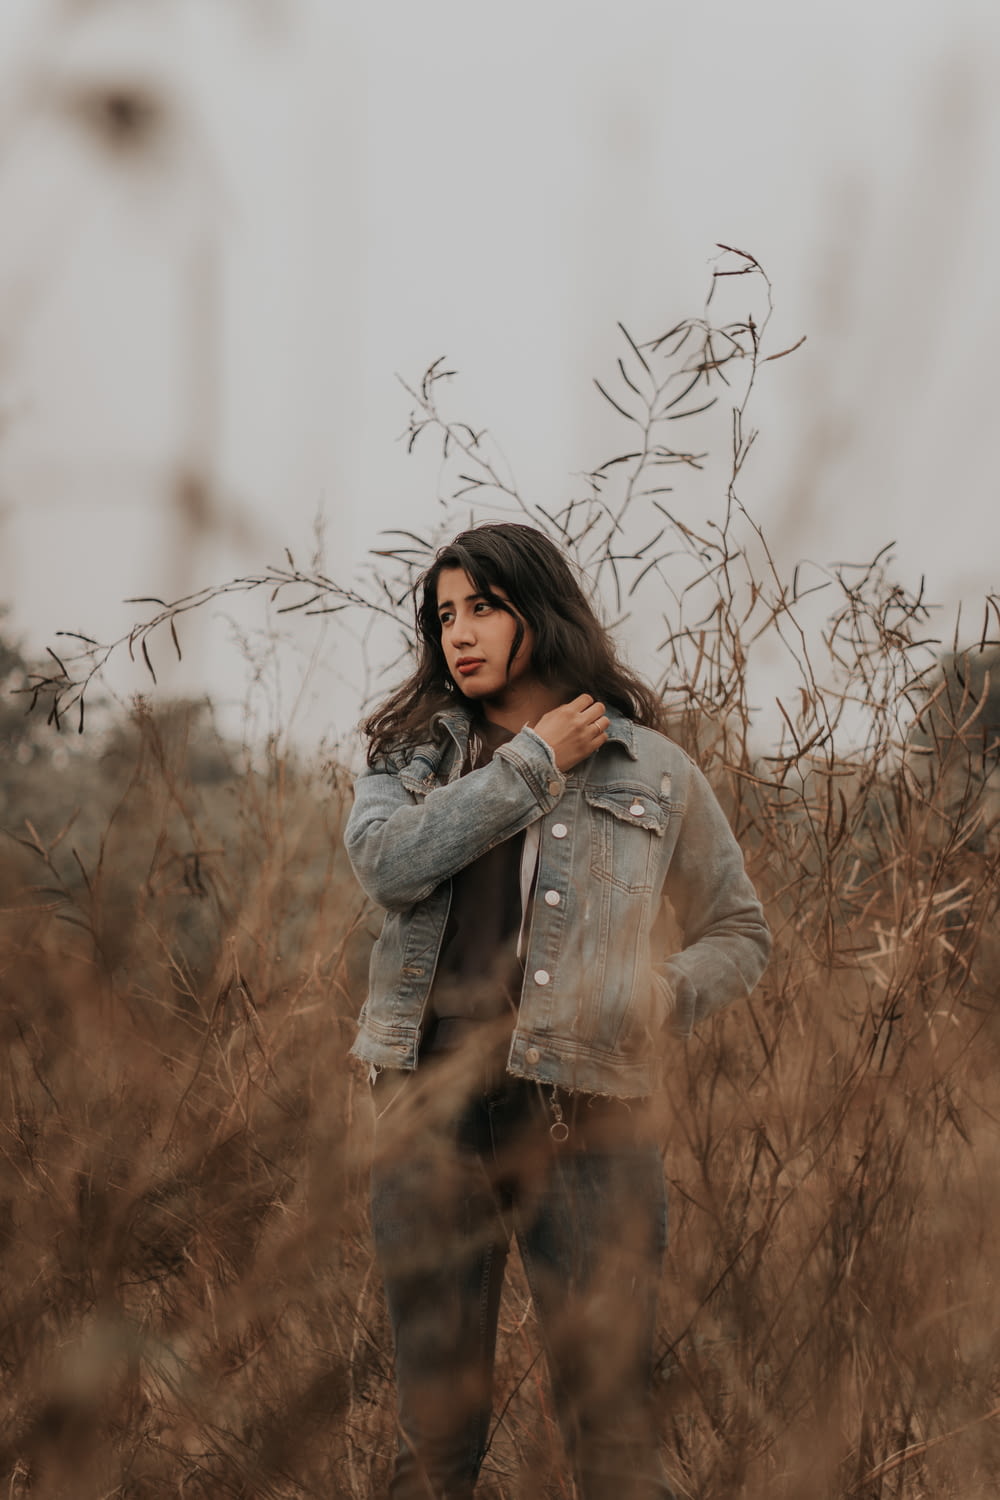 woman in gray denim jacket standing on brown grass field during daytime